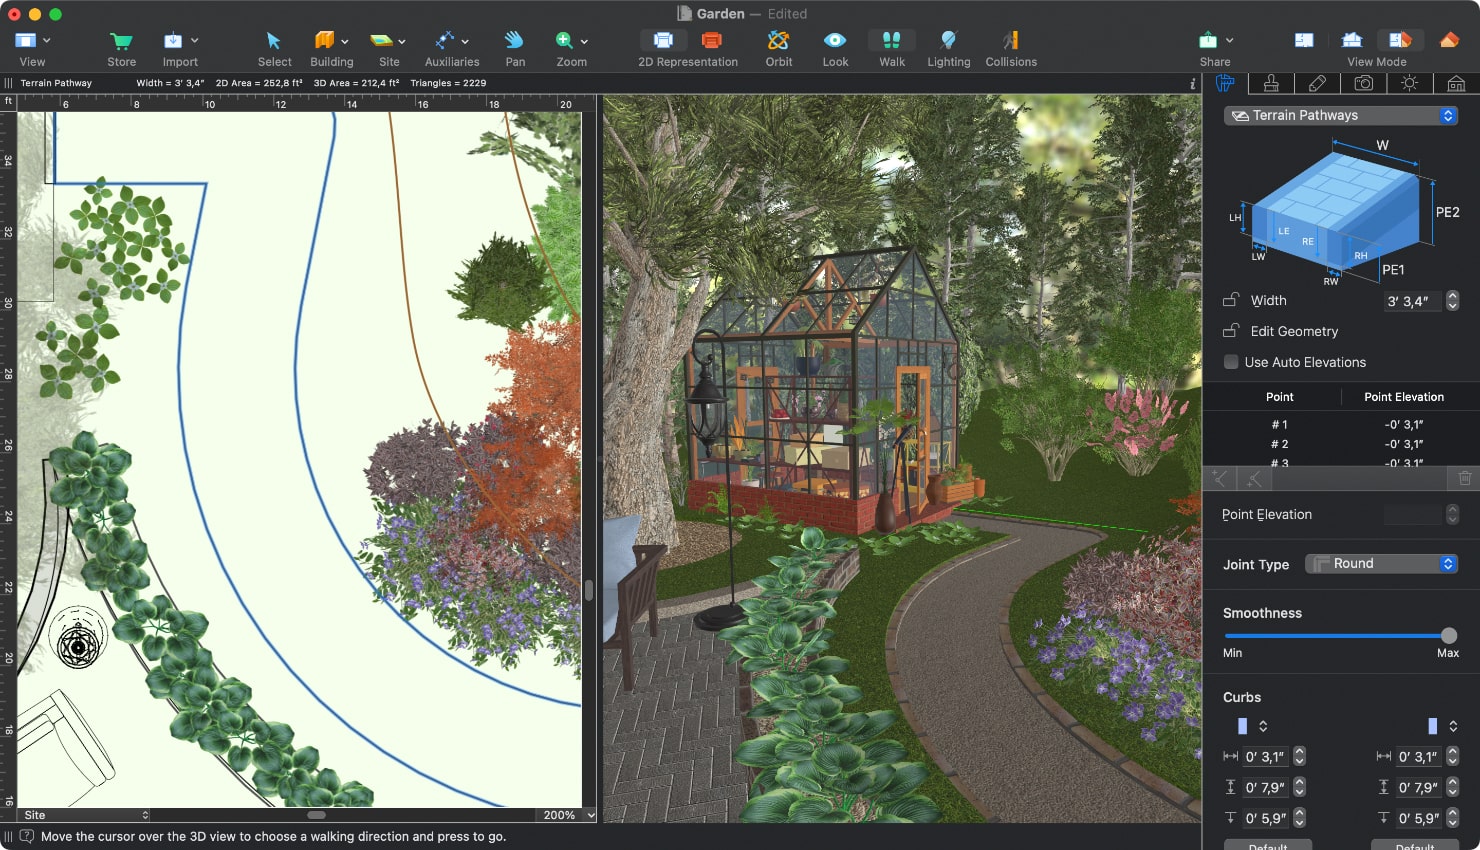 A screenshot showcasing the work with pathways in split-mode in Live Home 3D for Mac